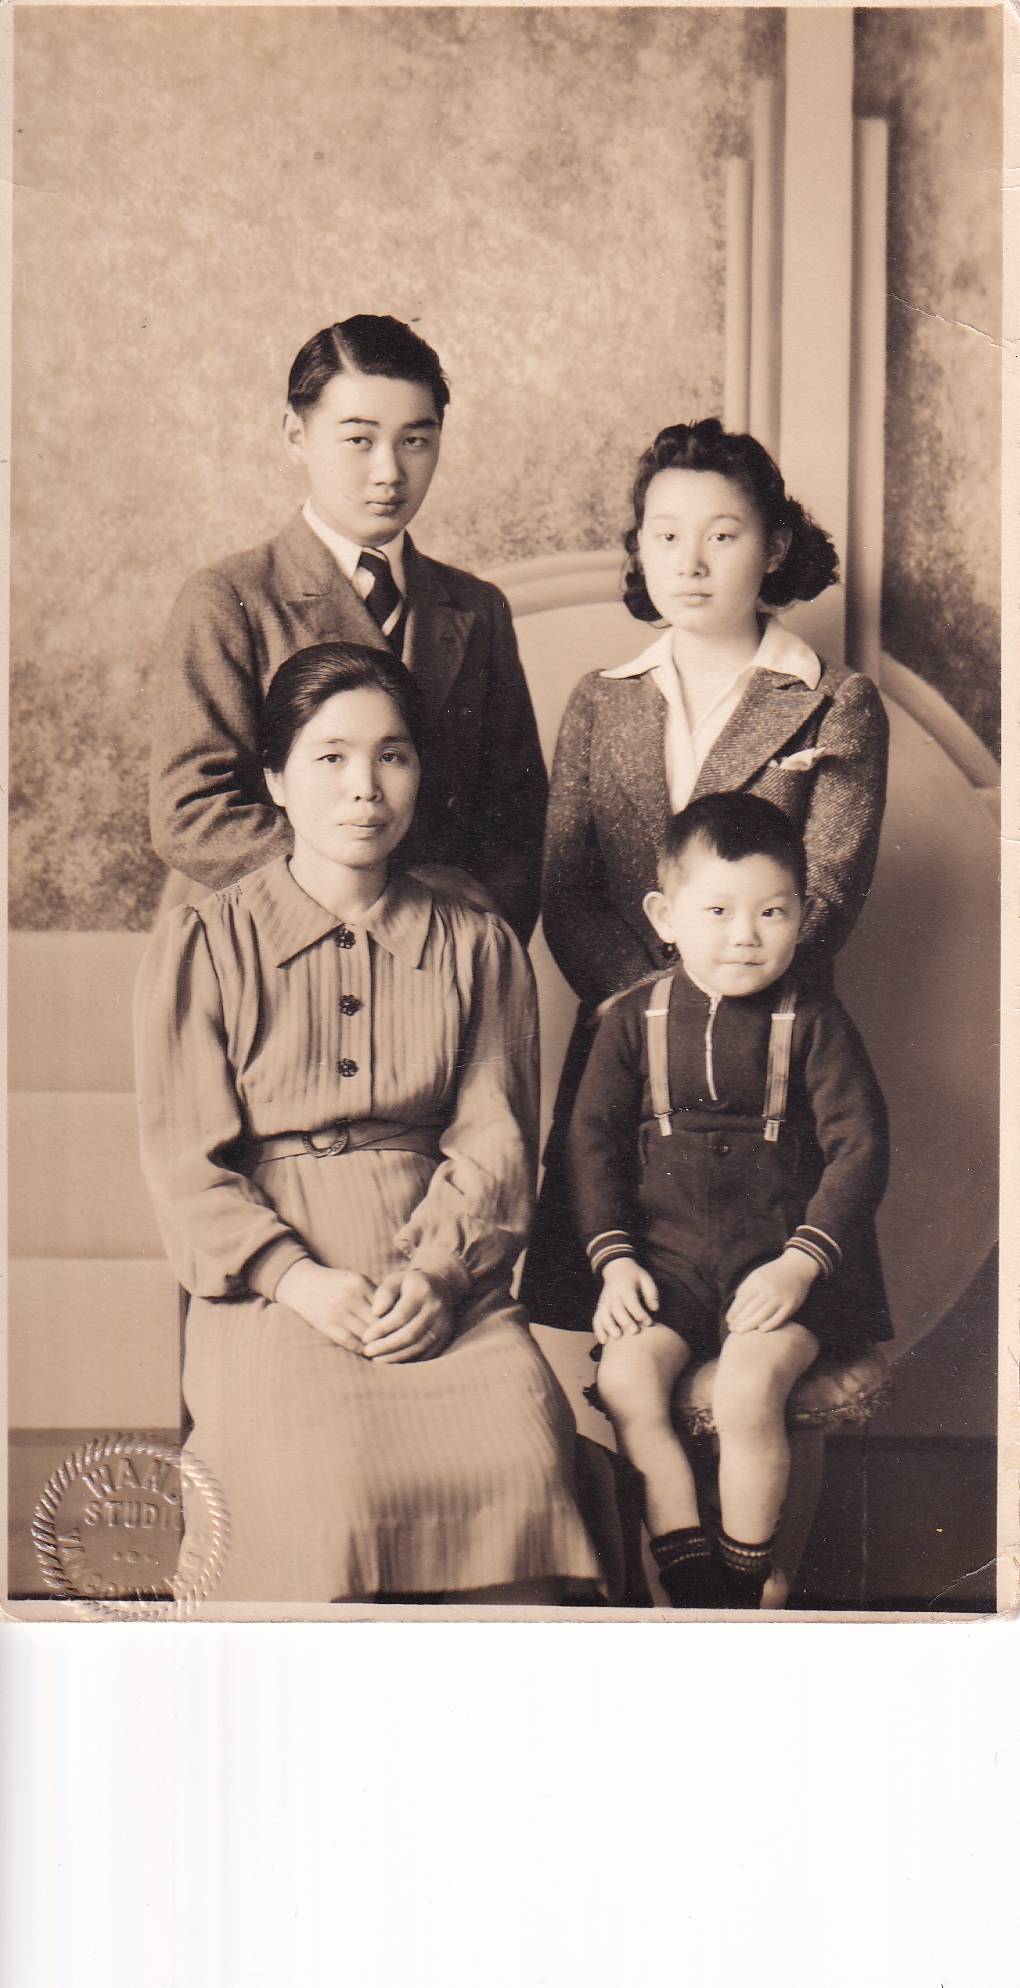 Ken Teshima as a young boy with his mother and two cousins